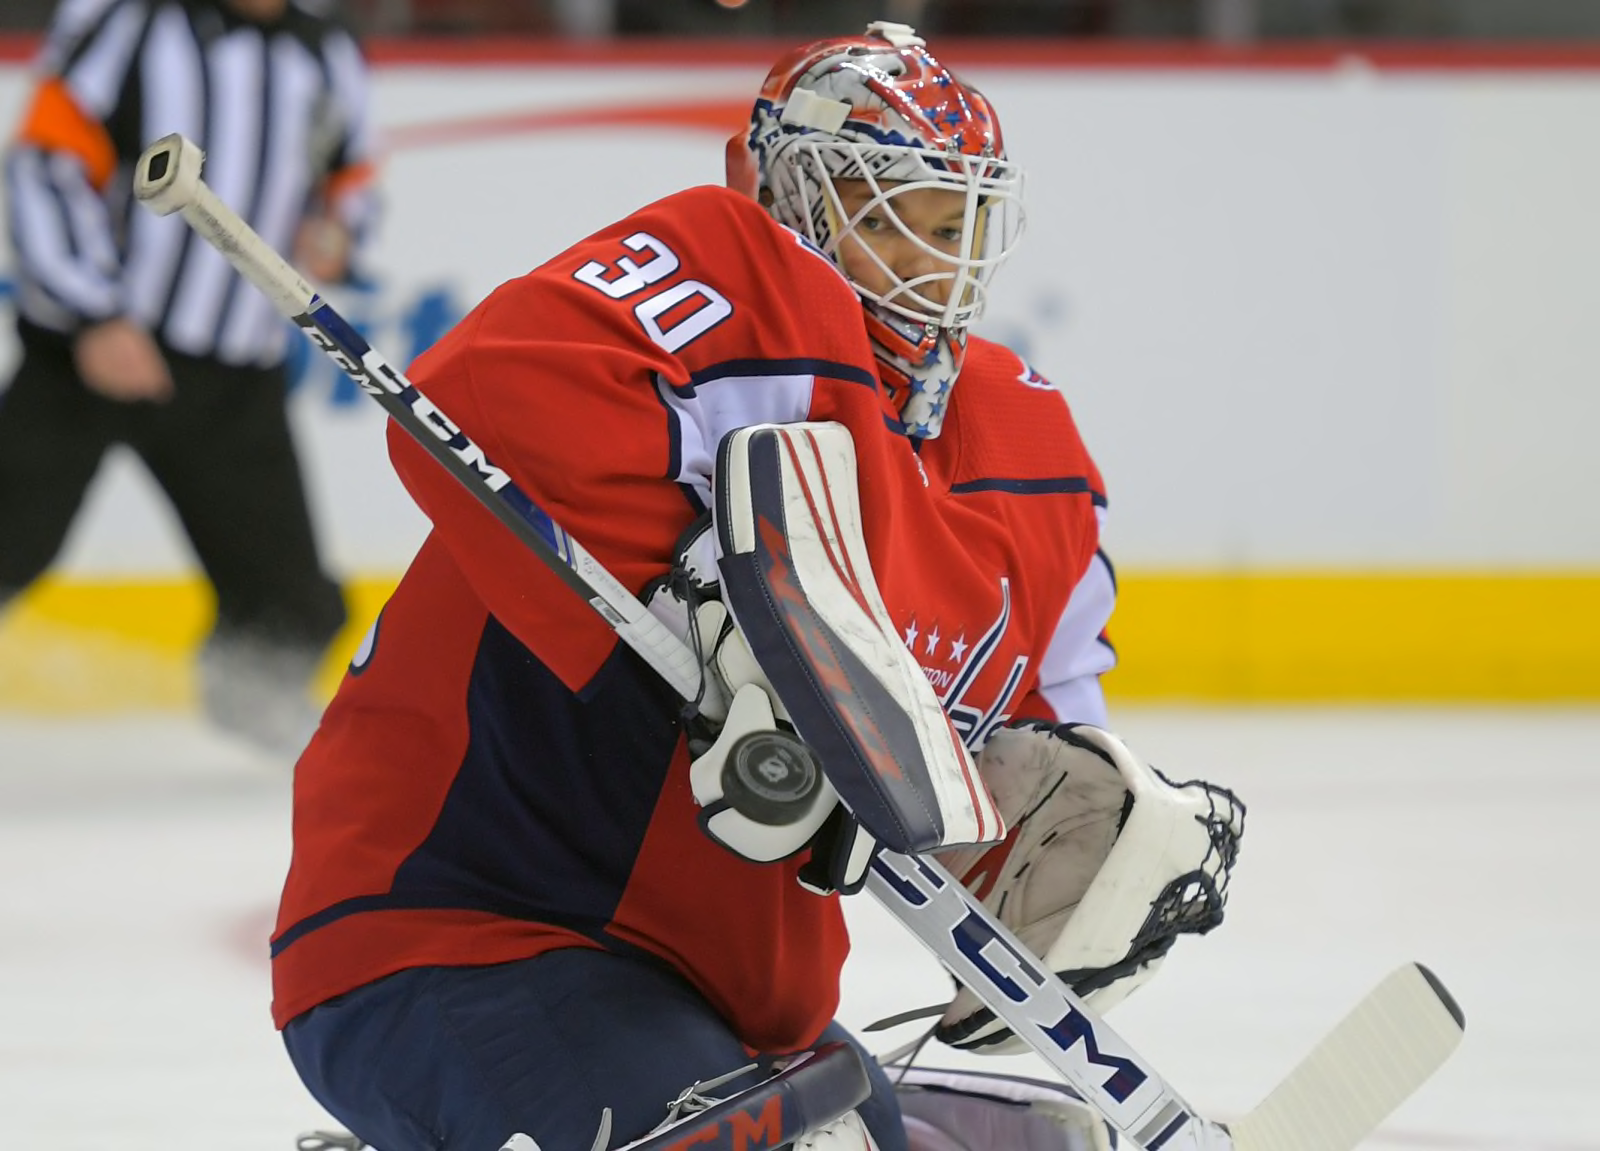 Capitals sign netminder Pheonix Copley to three-year contract extension